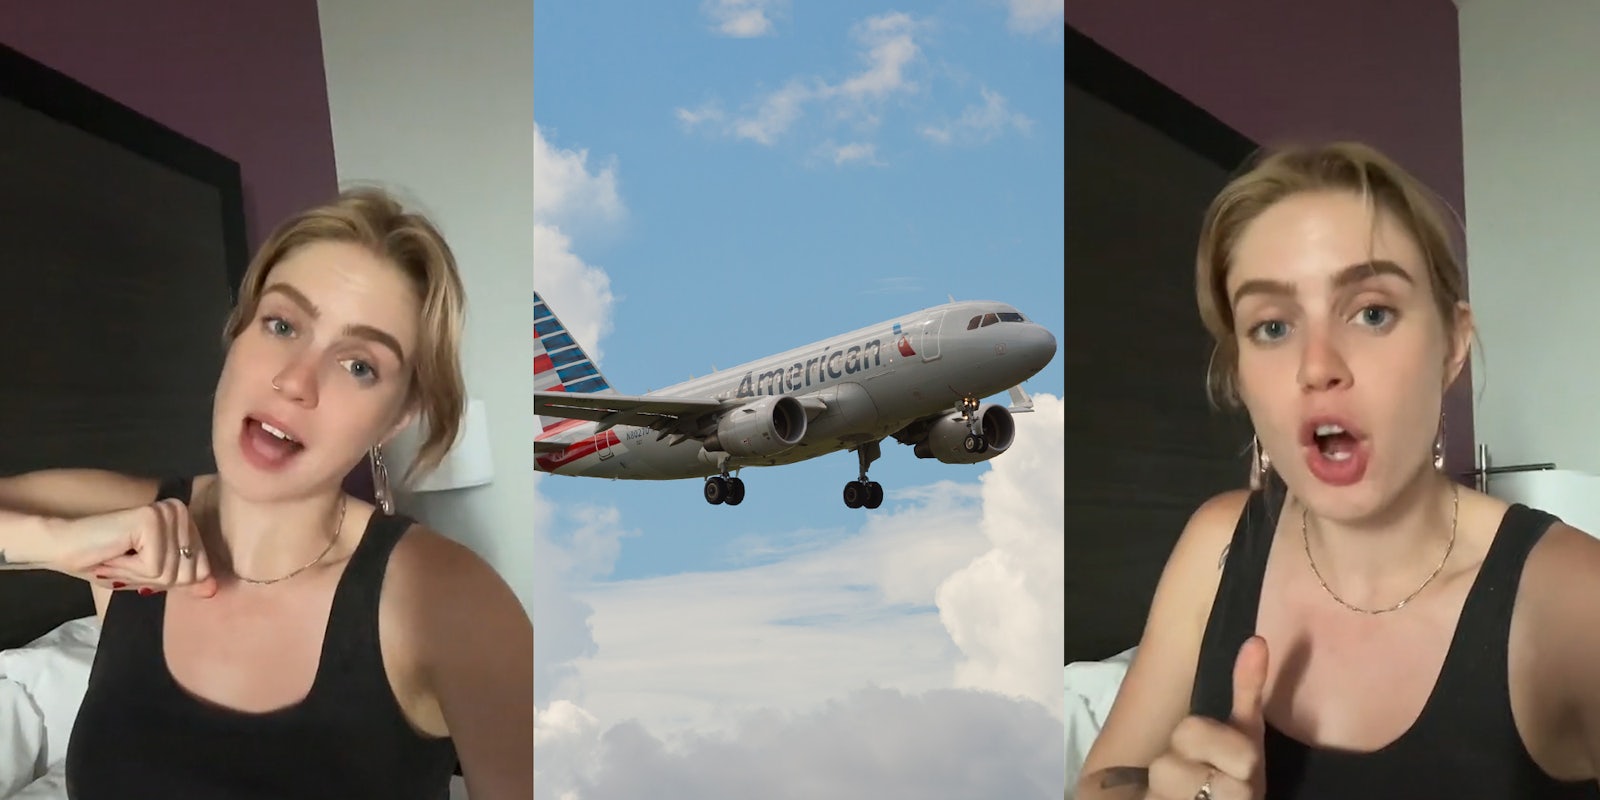 woman on bed speaking hand up (l) American Airlines Airplane in clouds blue sky (c) woman talking on bed thumb up (r)